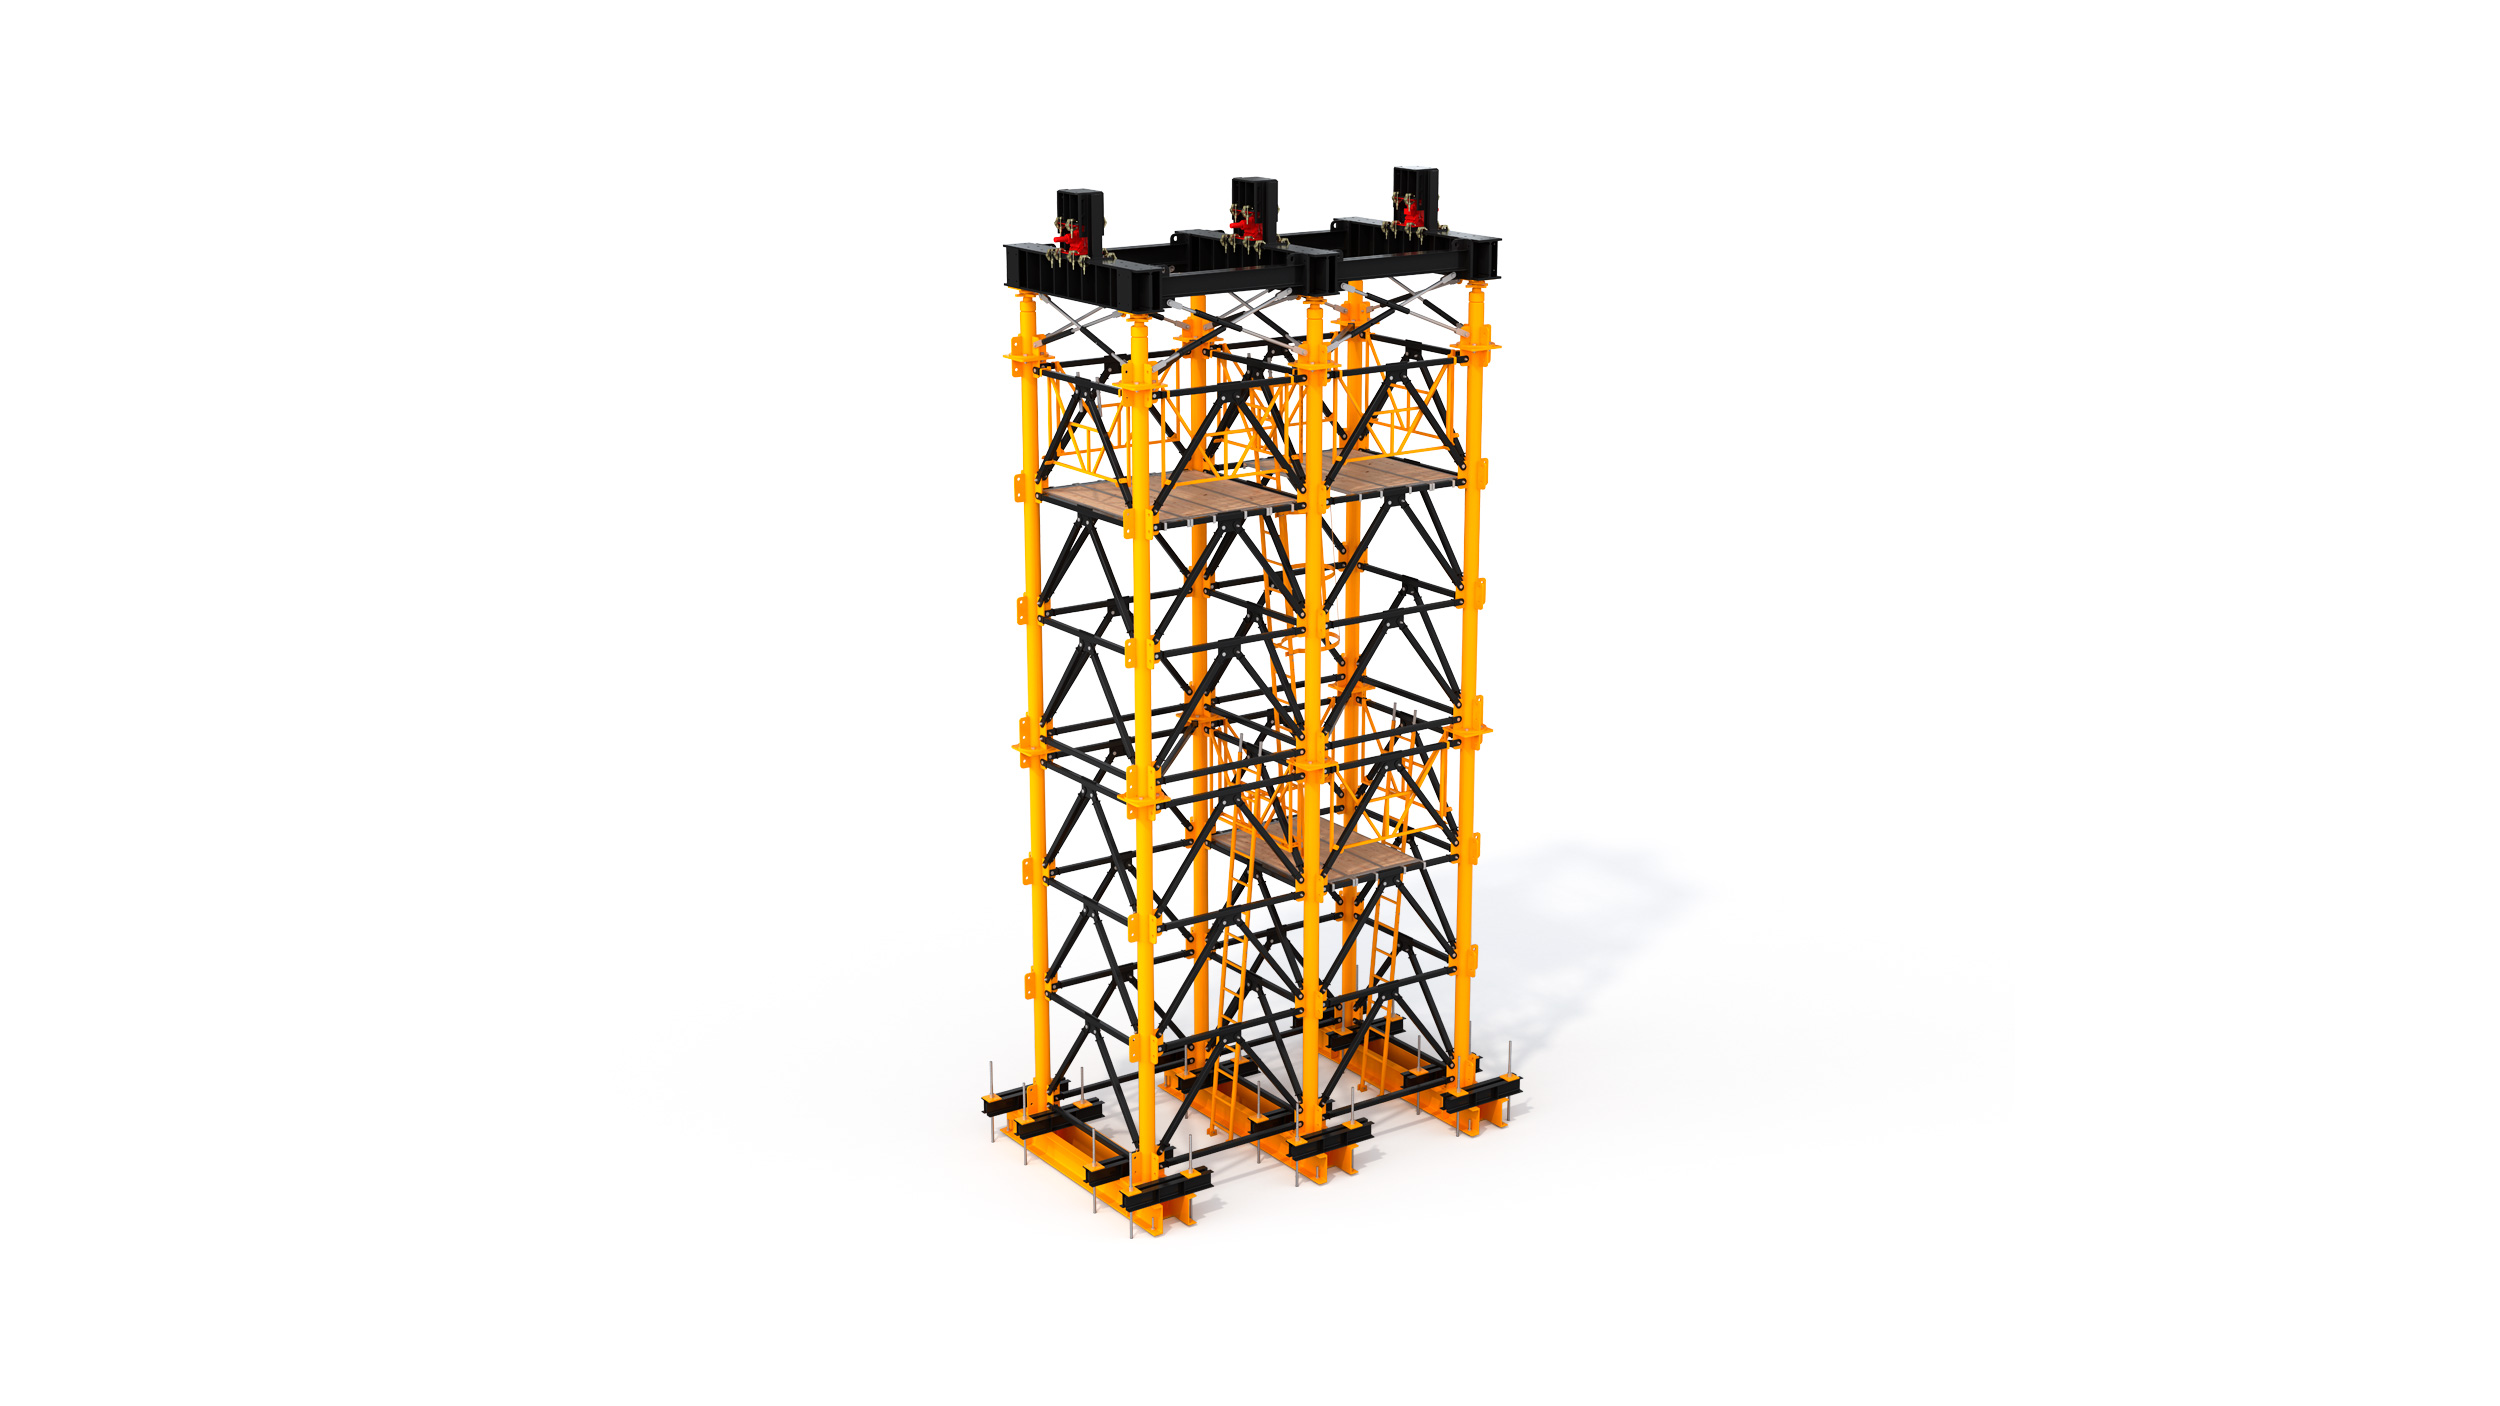 Heavy duty concrete shoring system mainly used for high-rise bridge or viaduct constructions. Highlights: modular system, easy transport, quick and safe on-site erection.